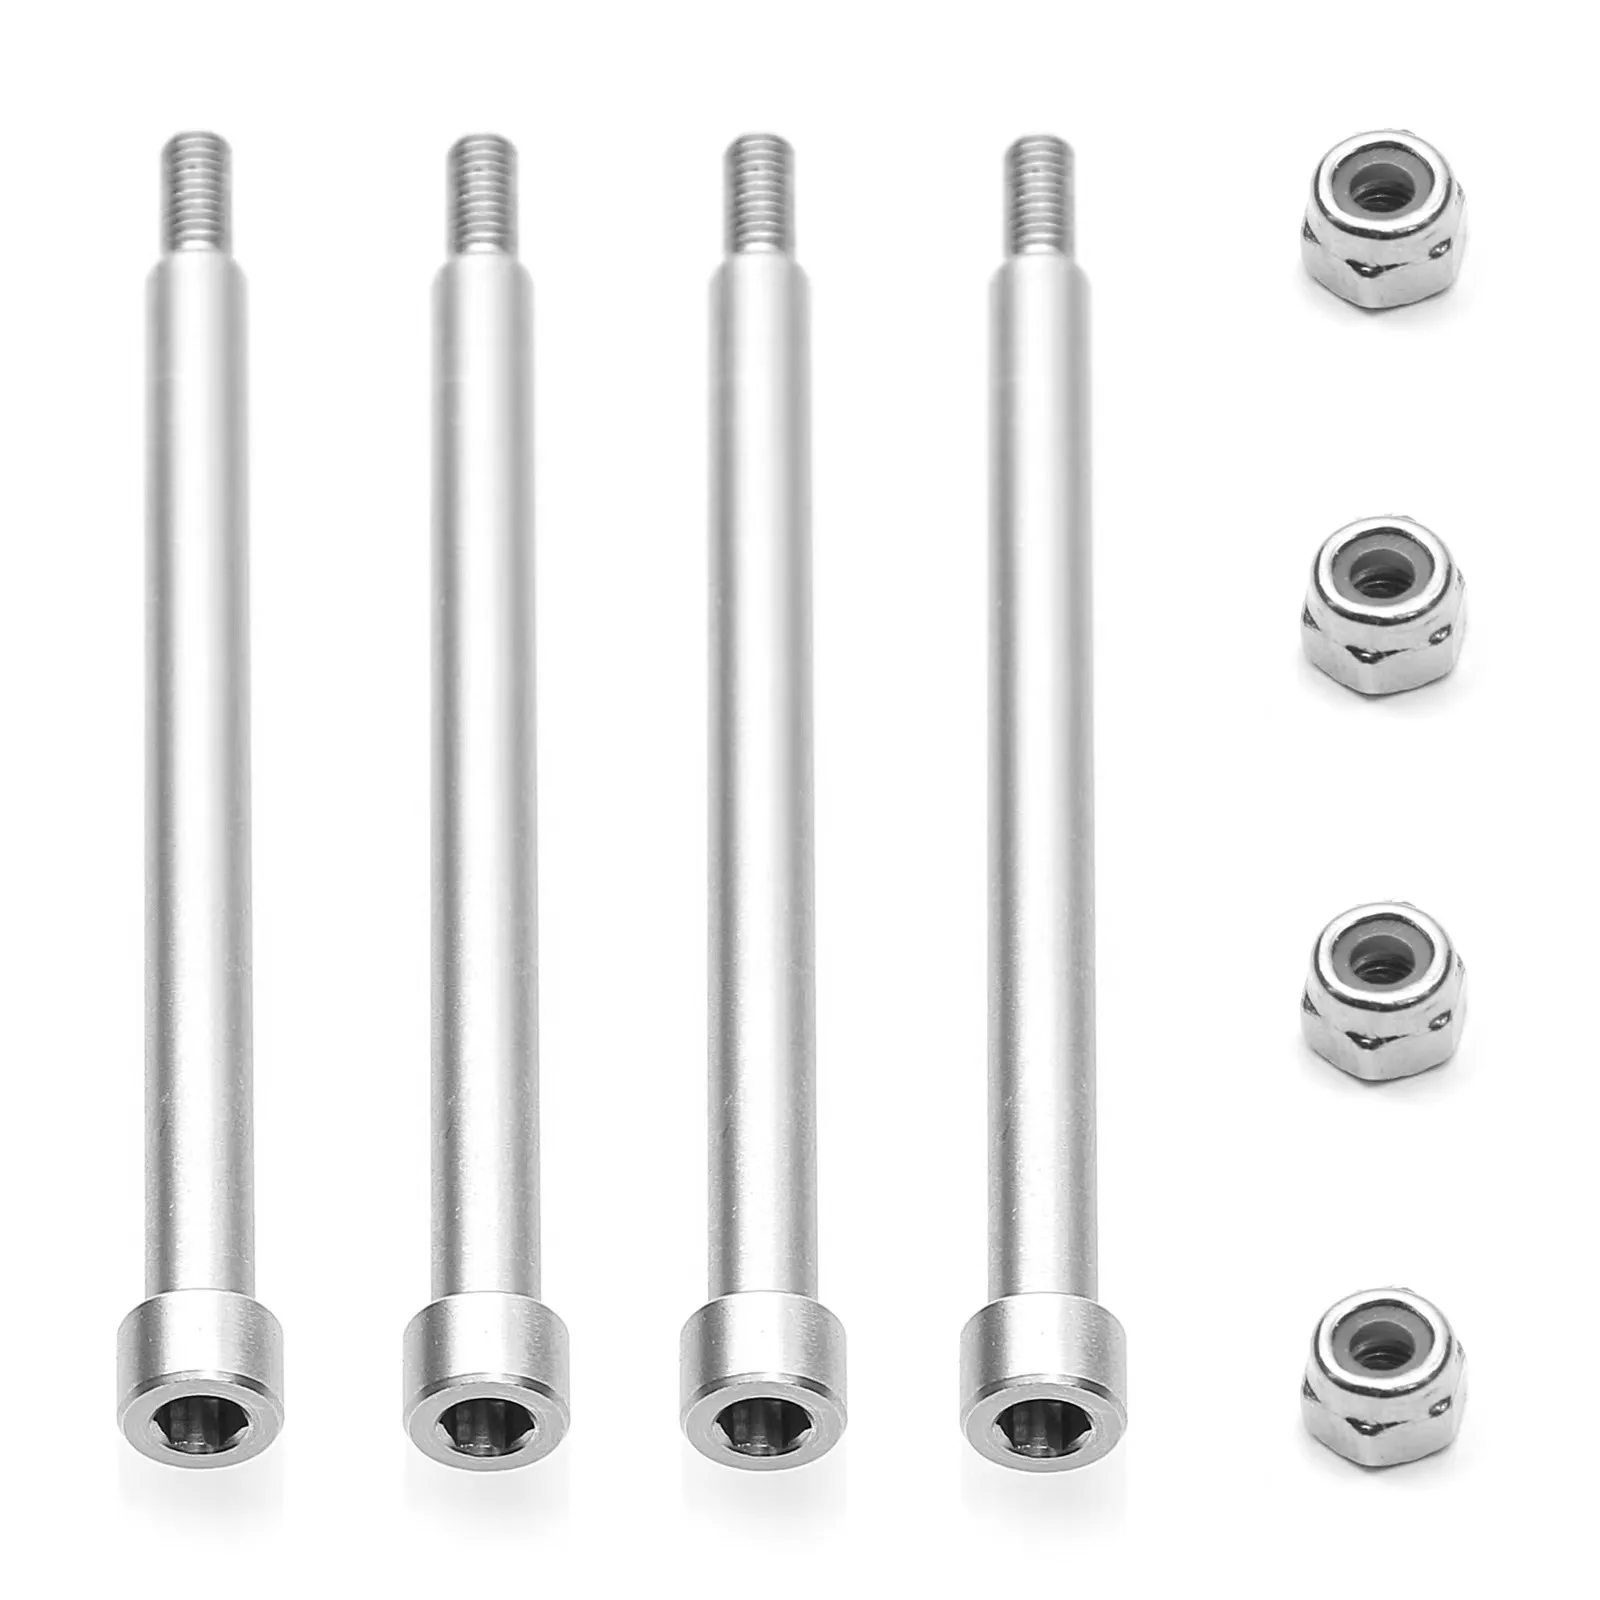 4Pcs 4x56mm Threaded Hinge Pins 70510 with M3 Nut for Traxxas 1/5 X-Maxx XMAXX 1/6 XRT RC Car Upgrade Parts Accessories